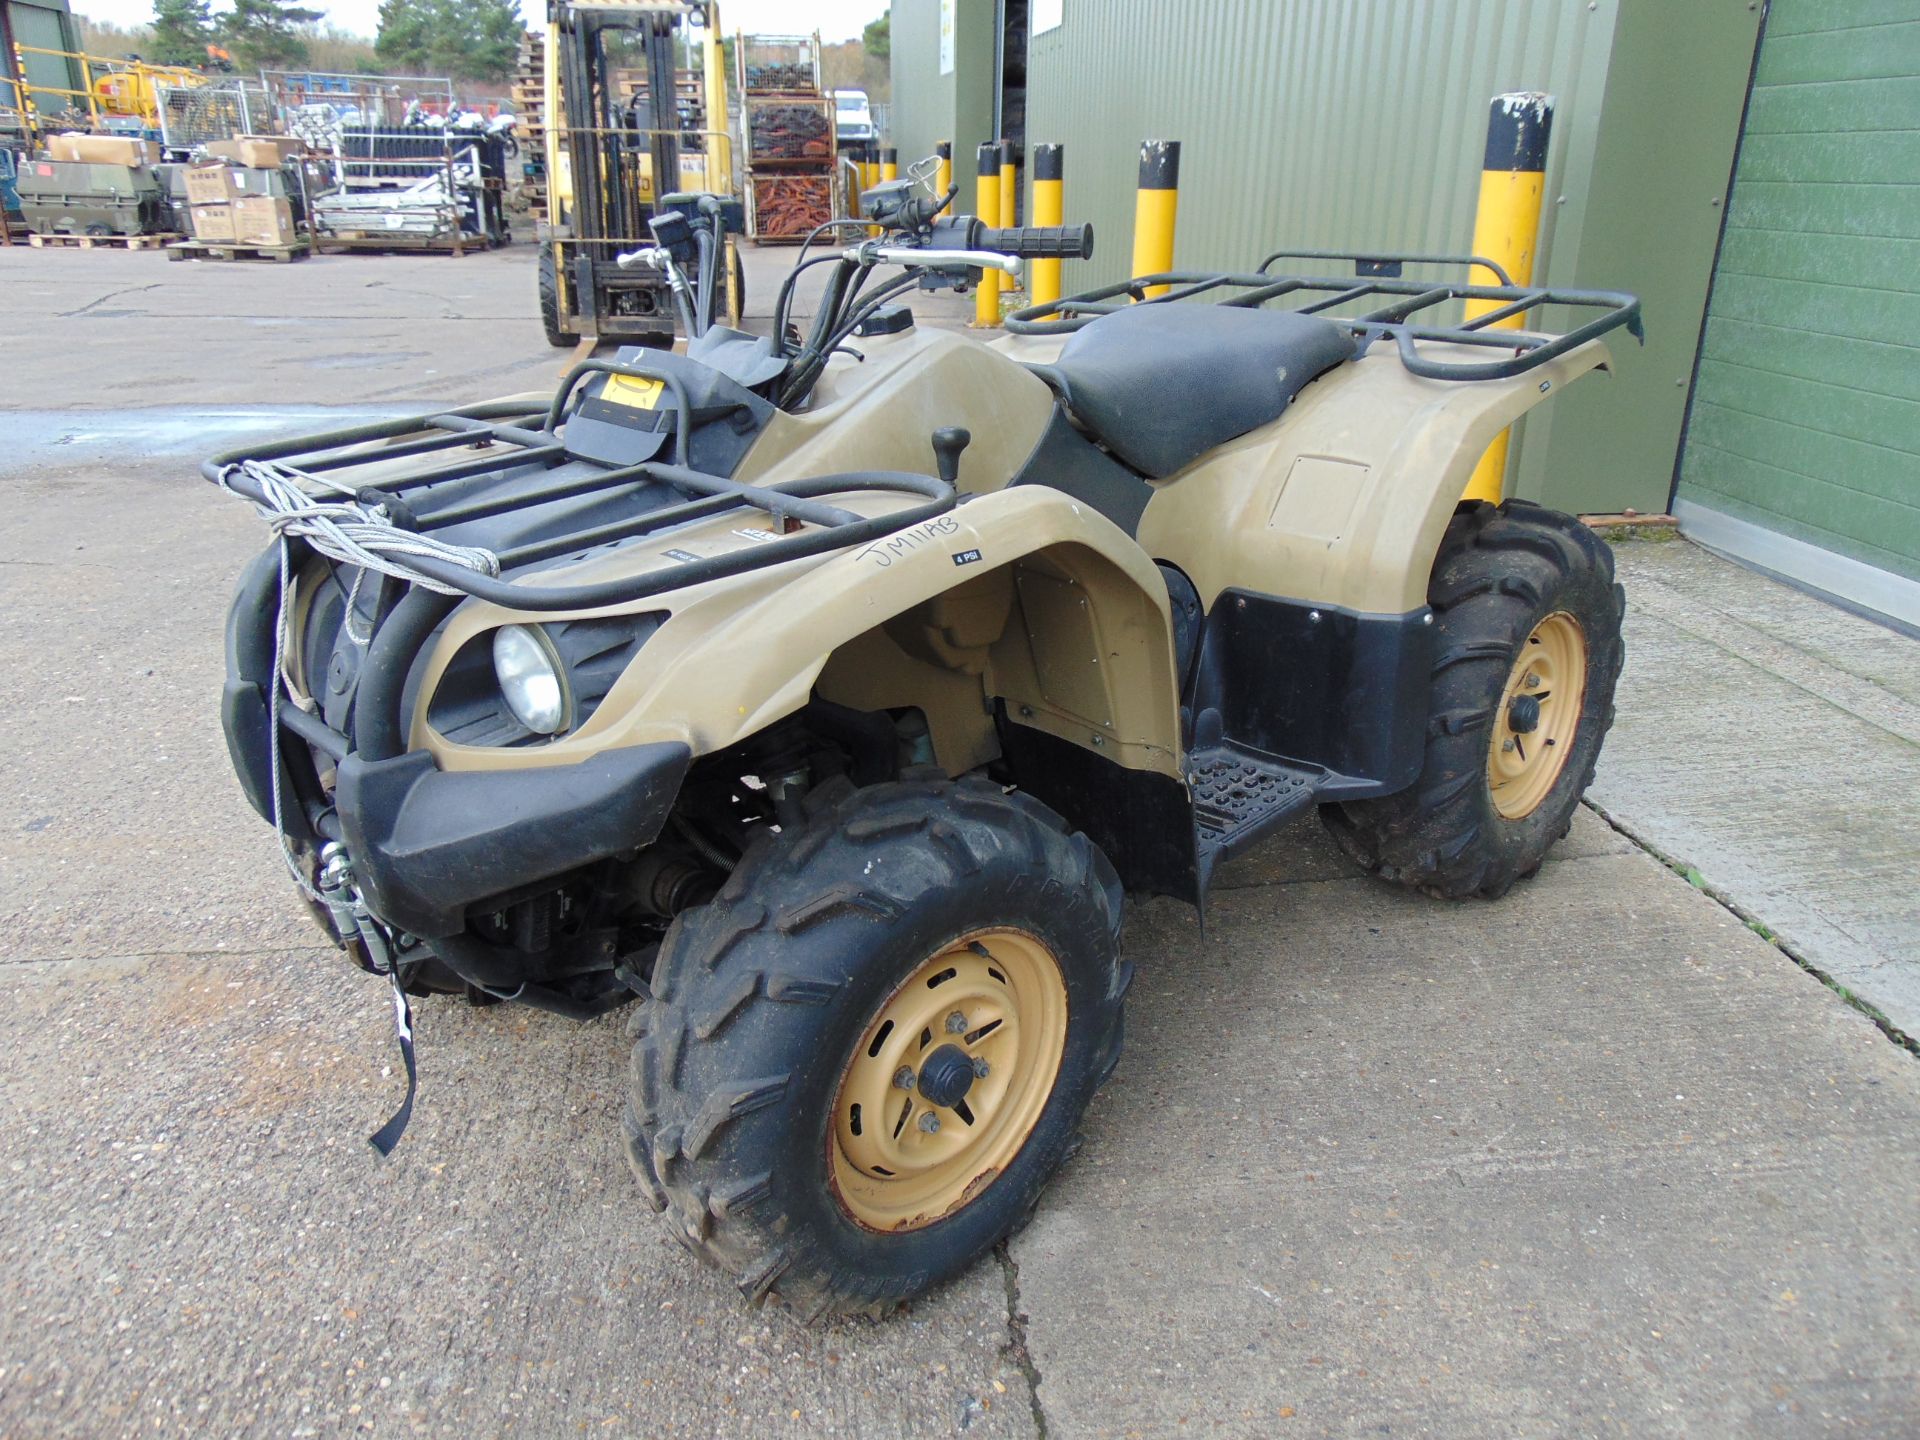 Military Specification Yamaha Grizzly 450 4 x 4 ATV Quad Bike Complete with Winch ONLY 591 HOURS! - Image 3 of 16